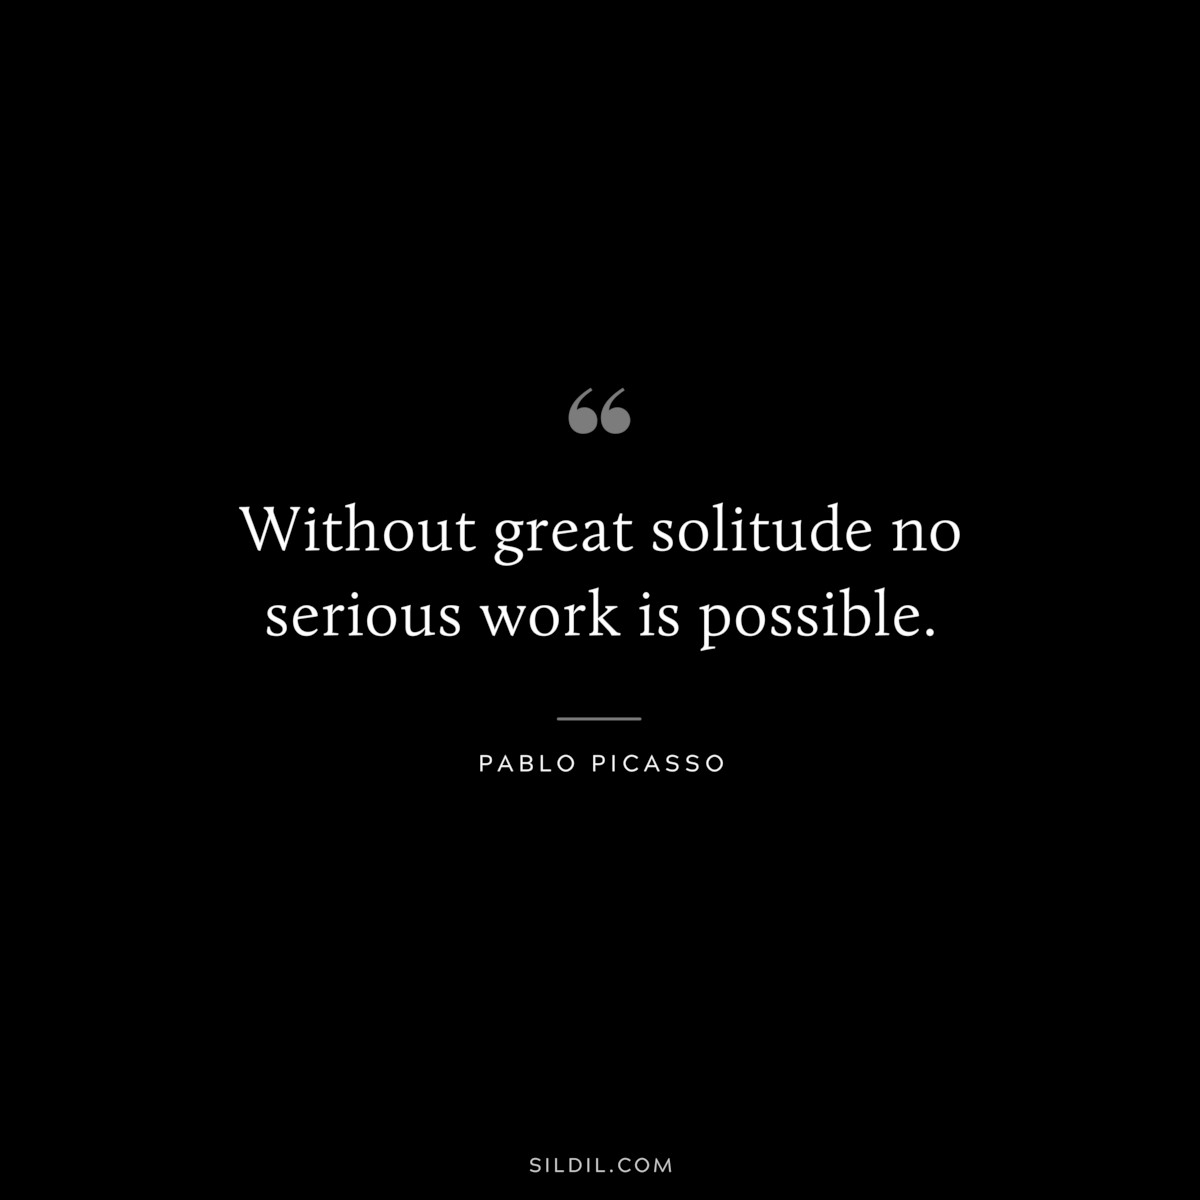 Without great solitude no serious work is possible. ― Pablo Picasso